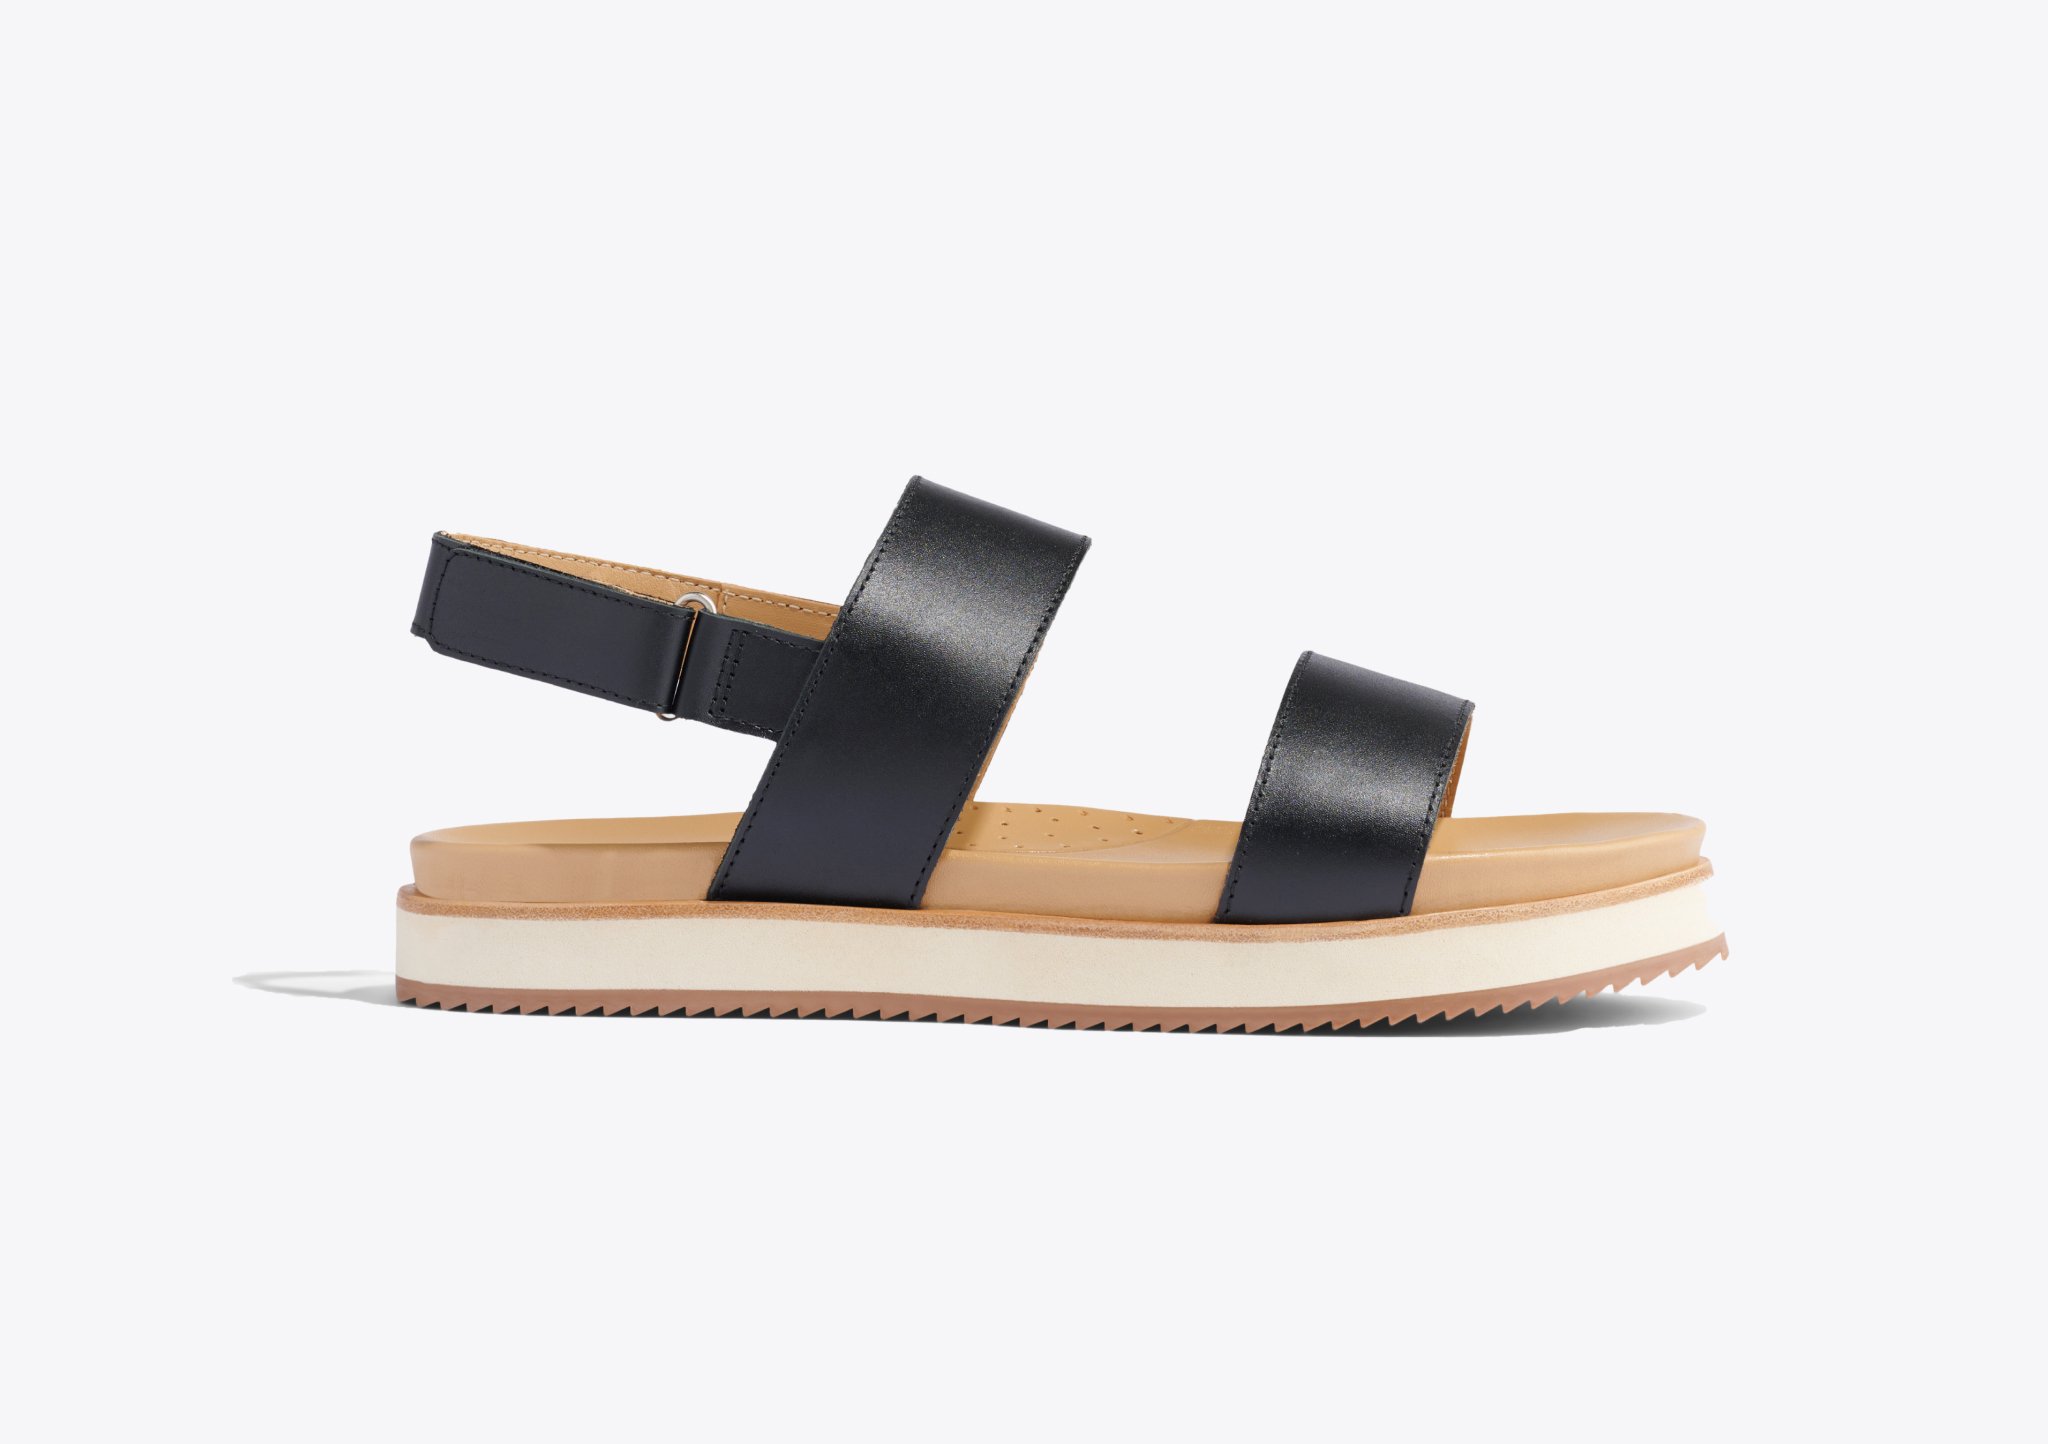 Nisolo Go-To Flatform Sandal 2.0 Black - Every Nisolo product is built on the foundation of comfort, function, and design. 